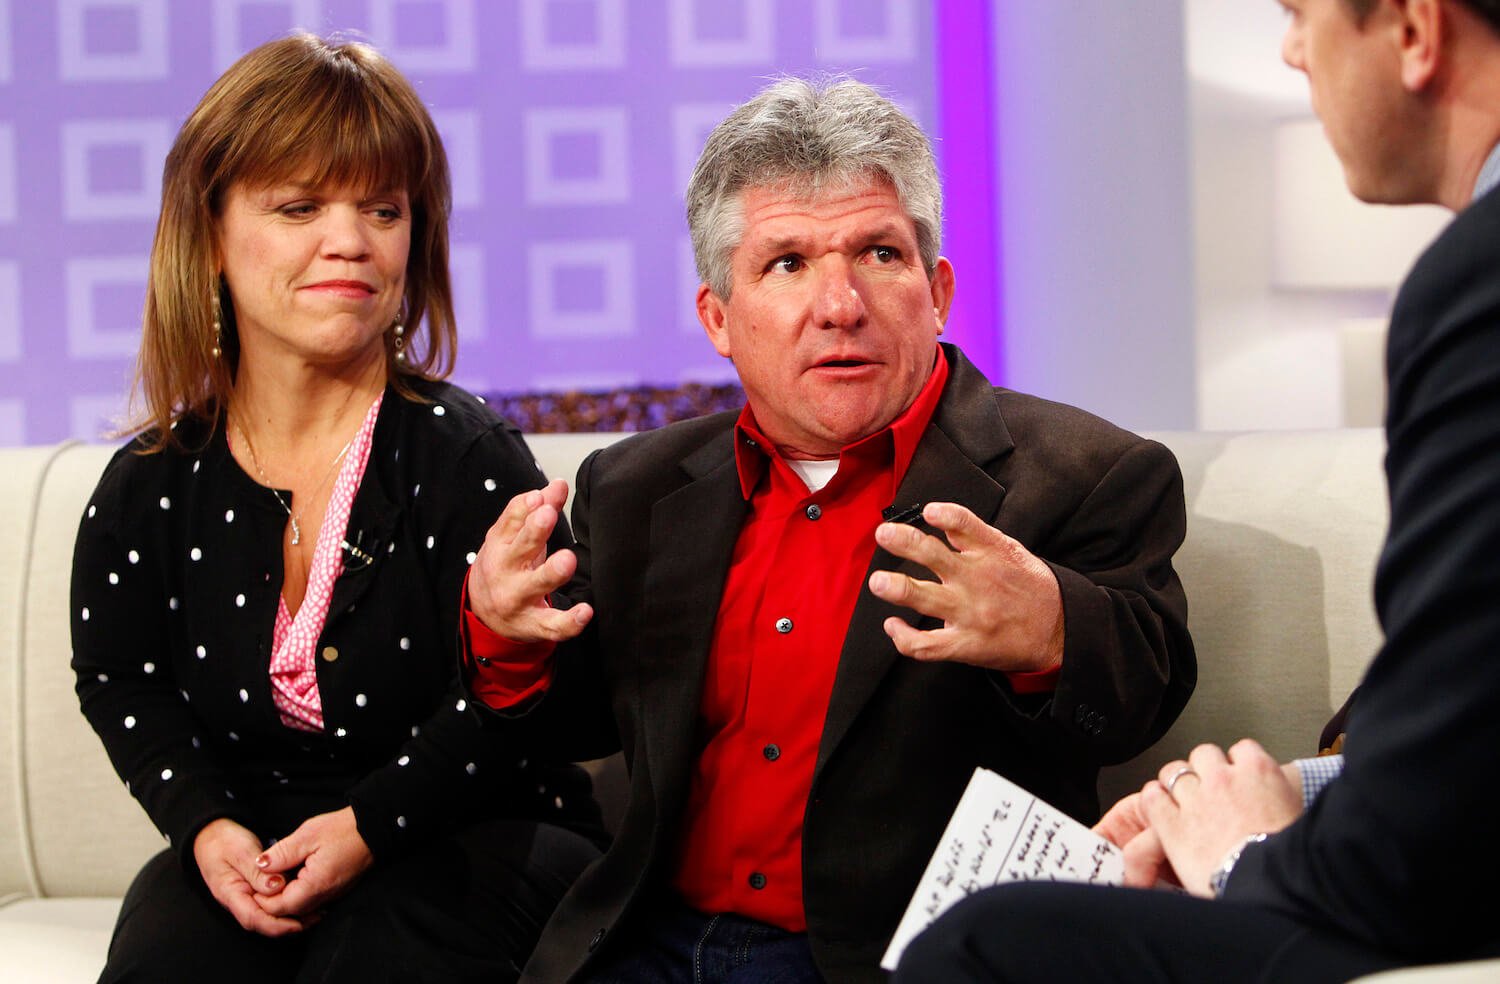 Matt Roloff and Amy Roloff from 'Little People, Big World' speaking during an interview